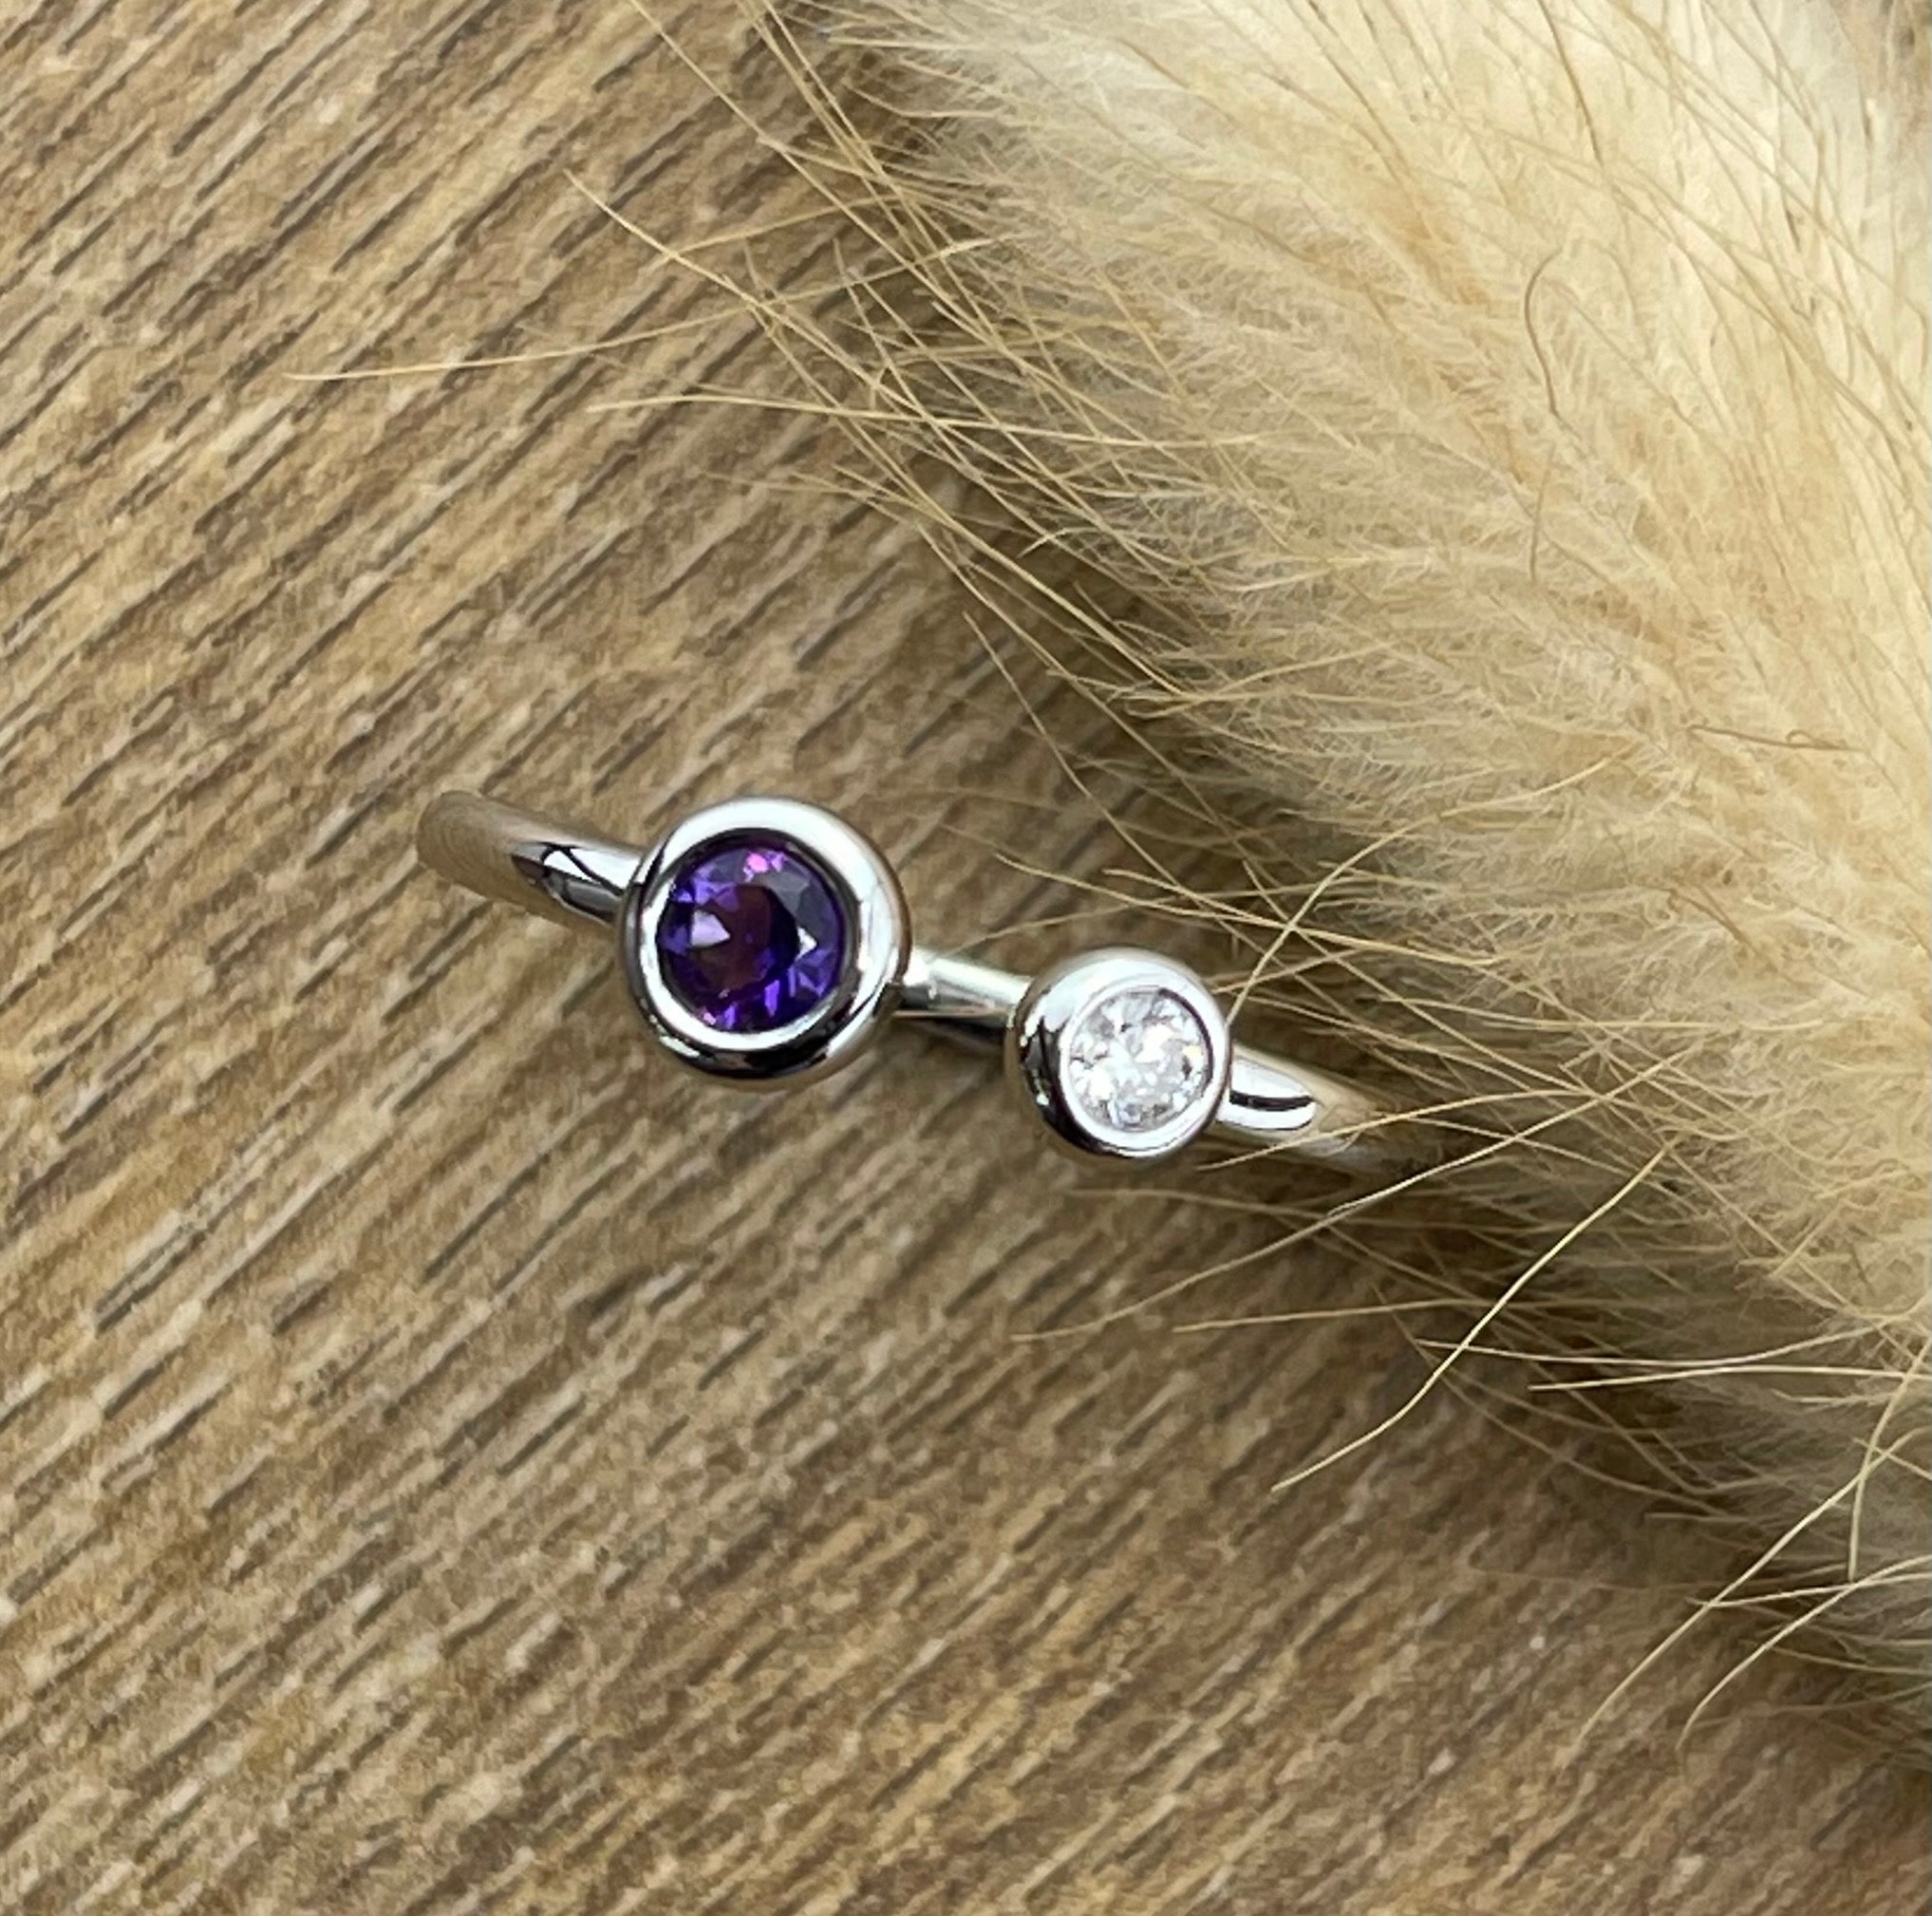 Open amethyst and diamond ring